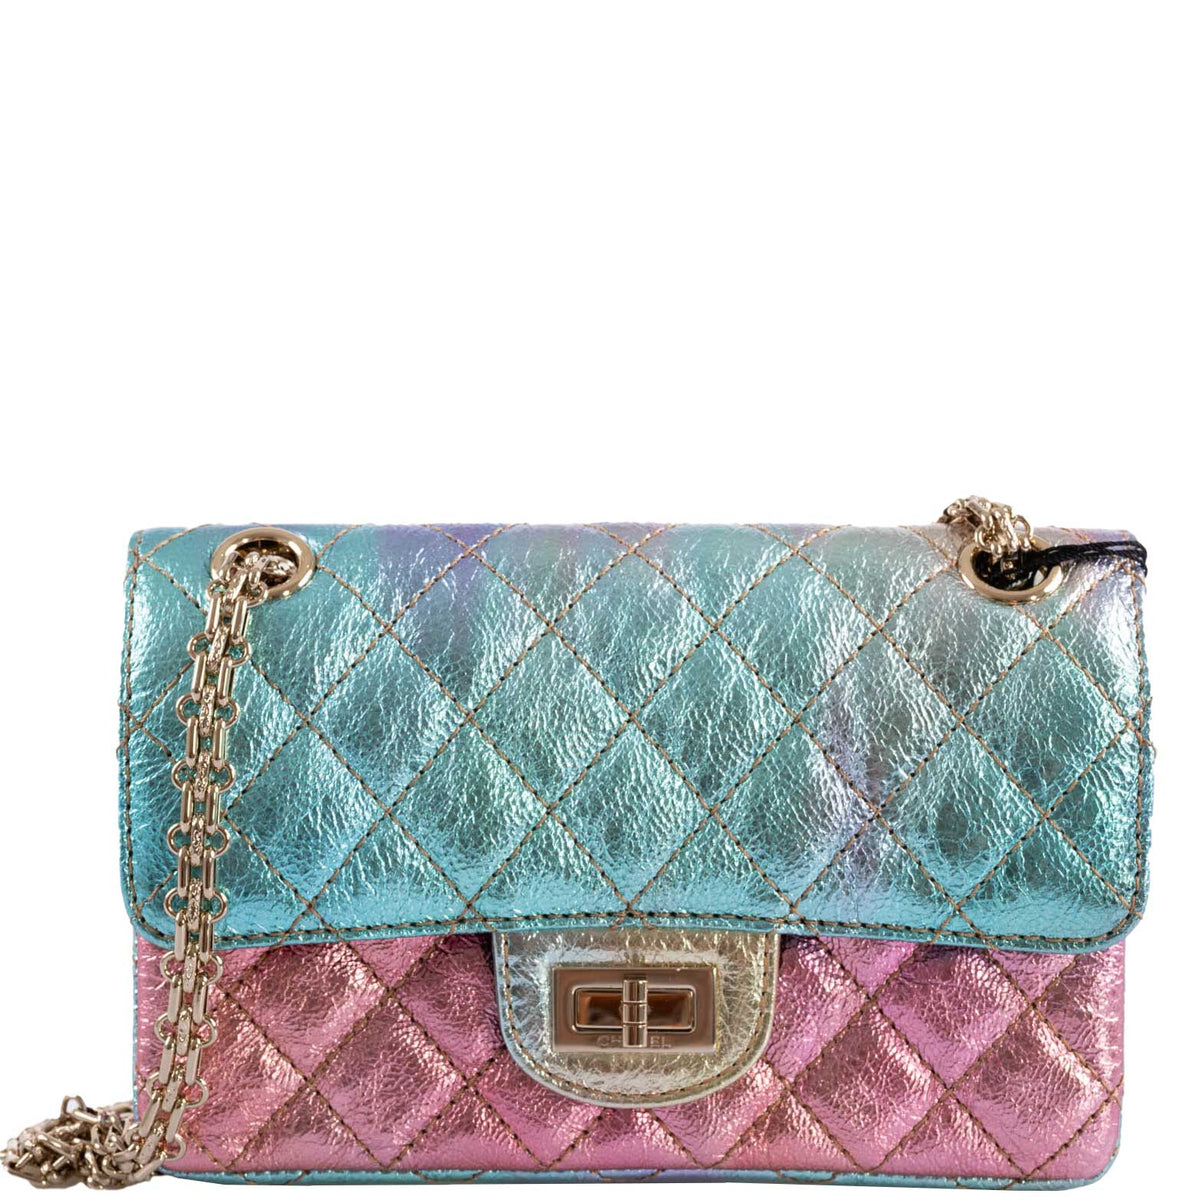 CHANEL Metallic Goatskin Quilted Mini 2.55 Reissue Flap Multicolor 536060